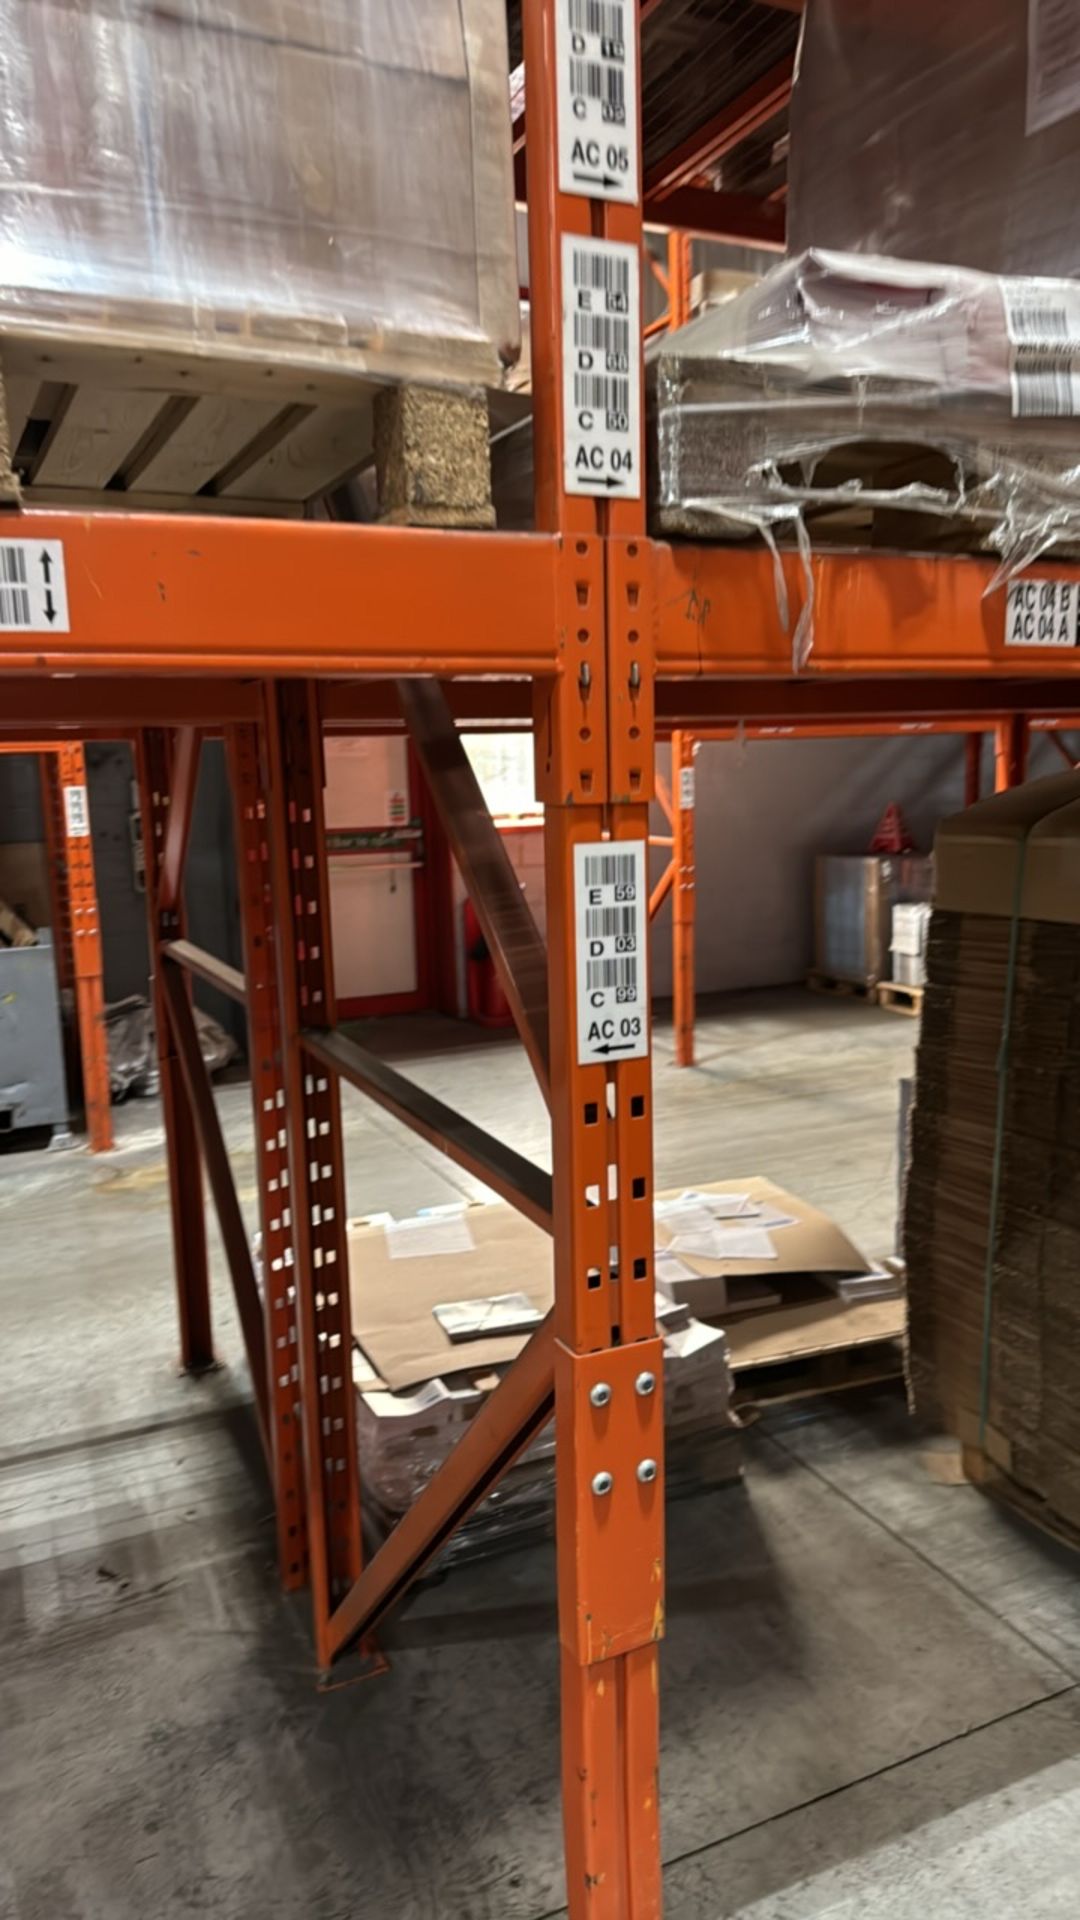 24 Bays Of Boltless Pallet Racking - Image 8 of 8